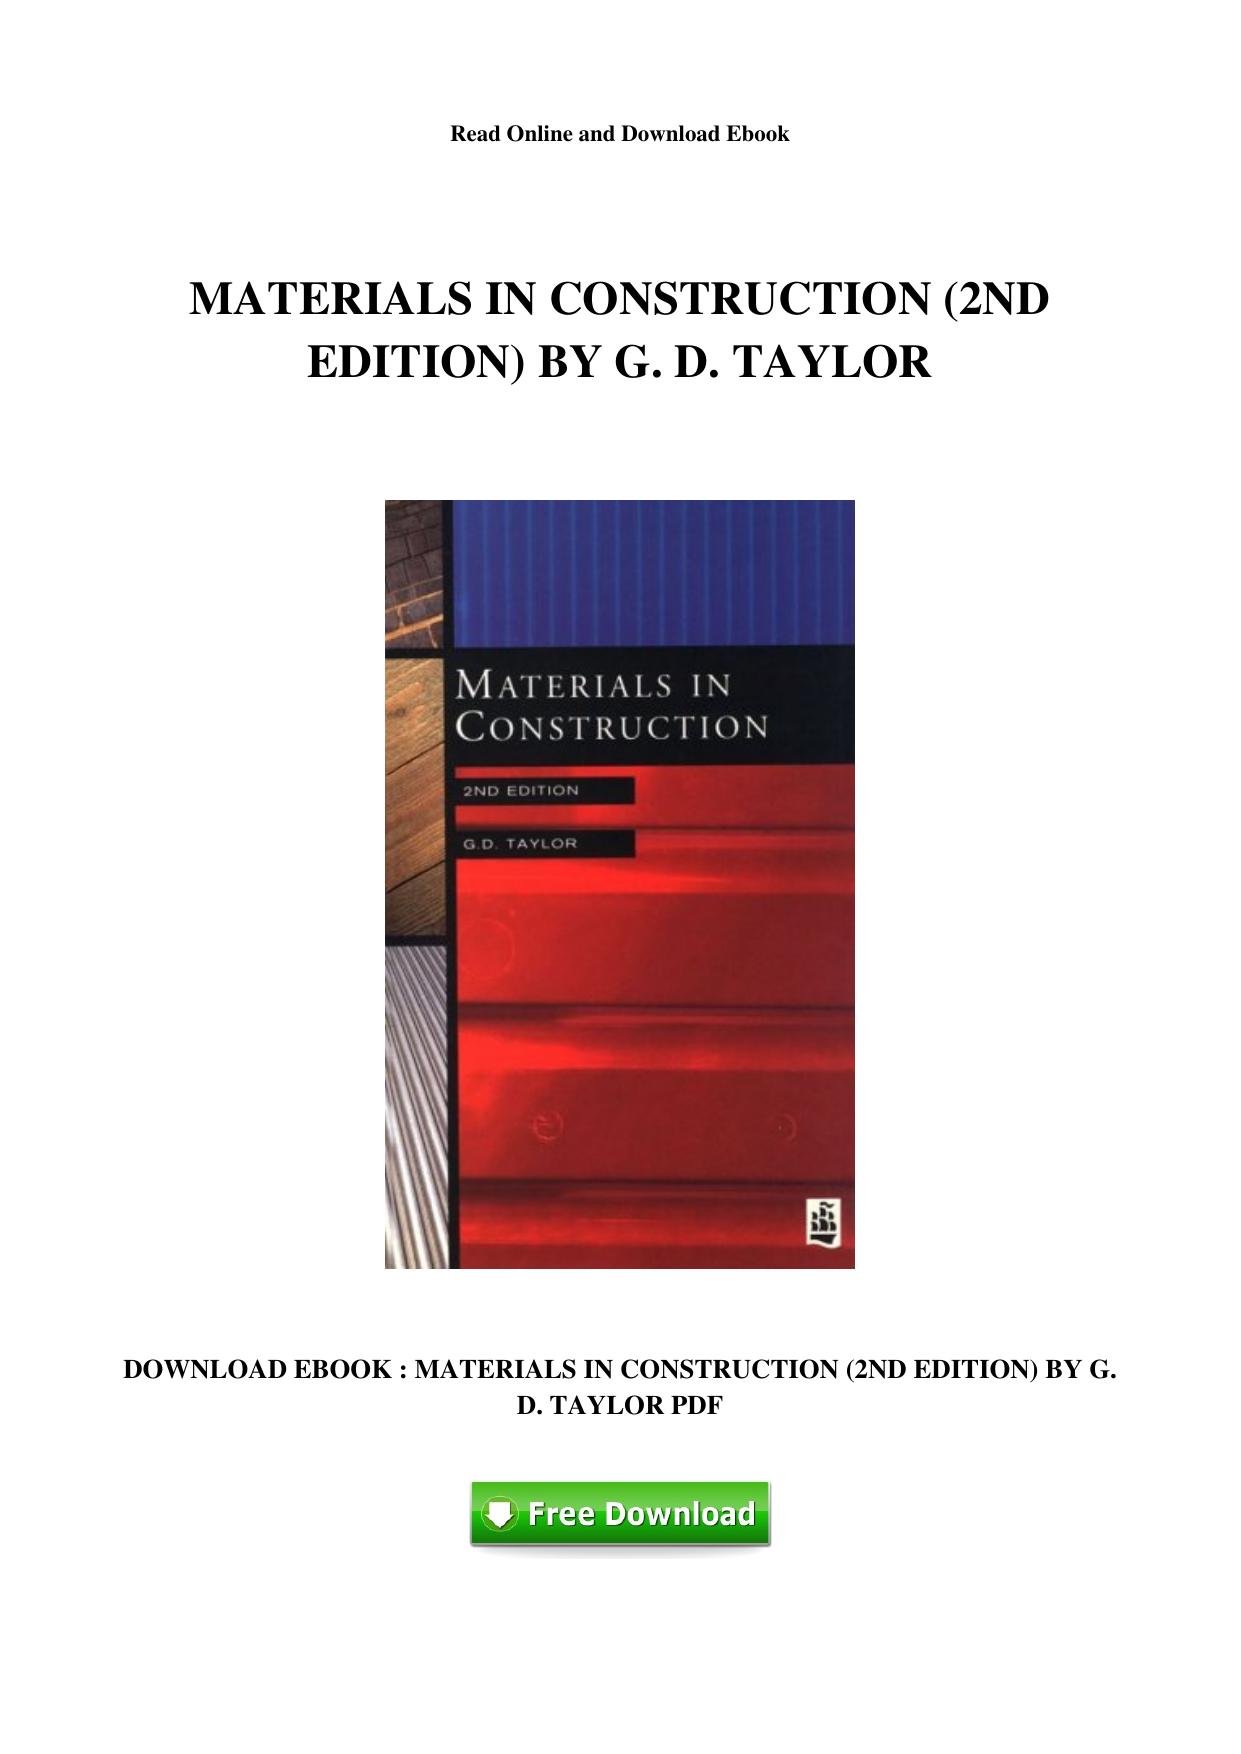 [C738.Ebook] Download Materials in Construction (2nd Edition)